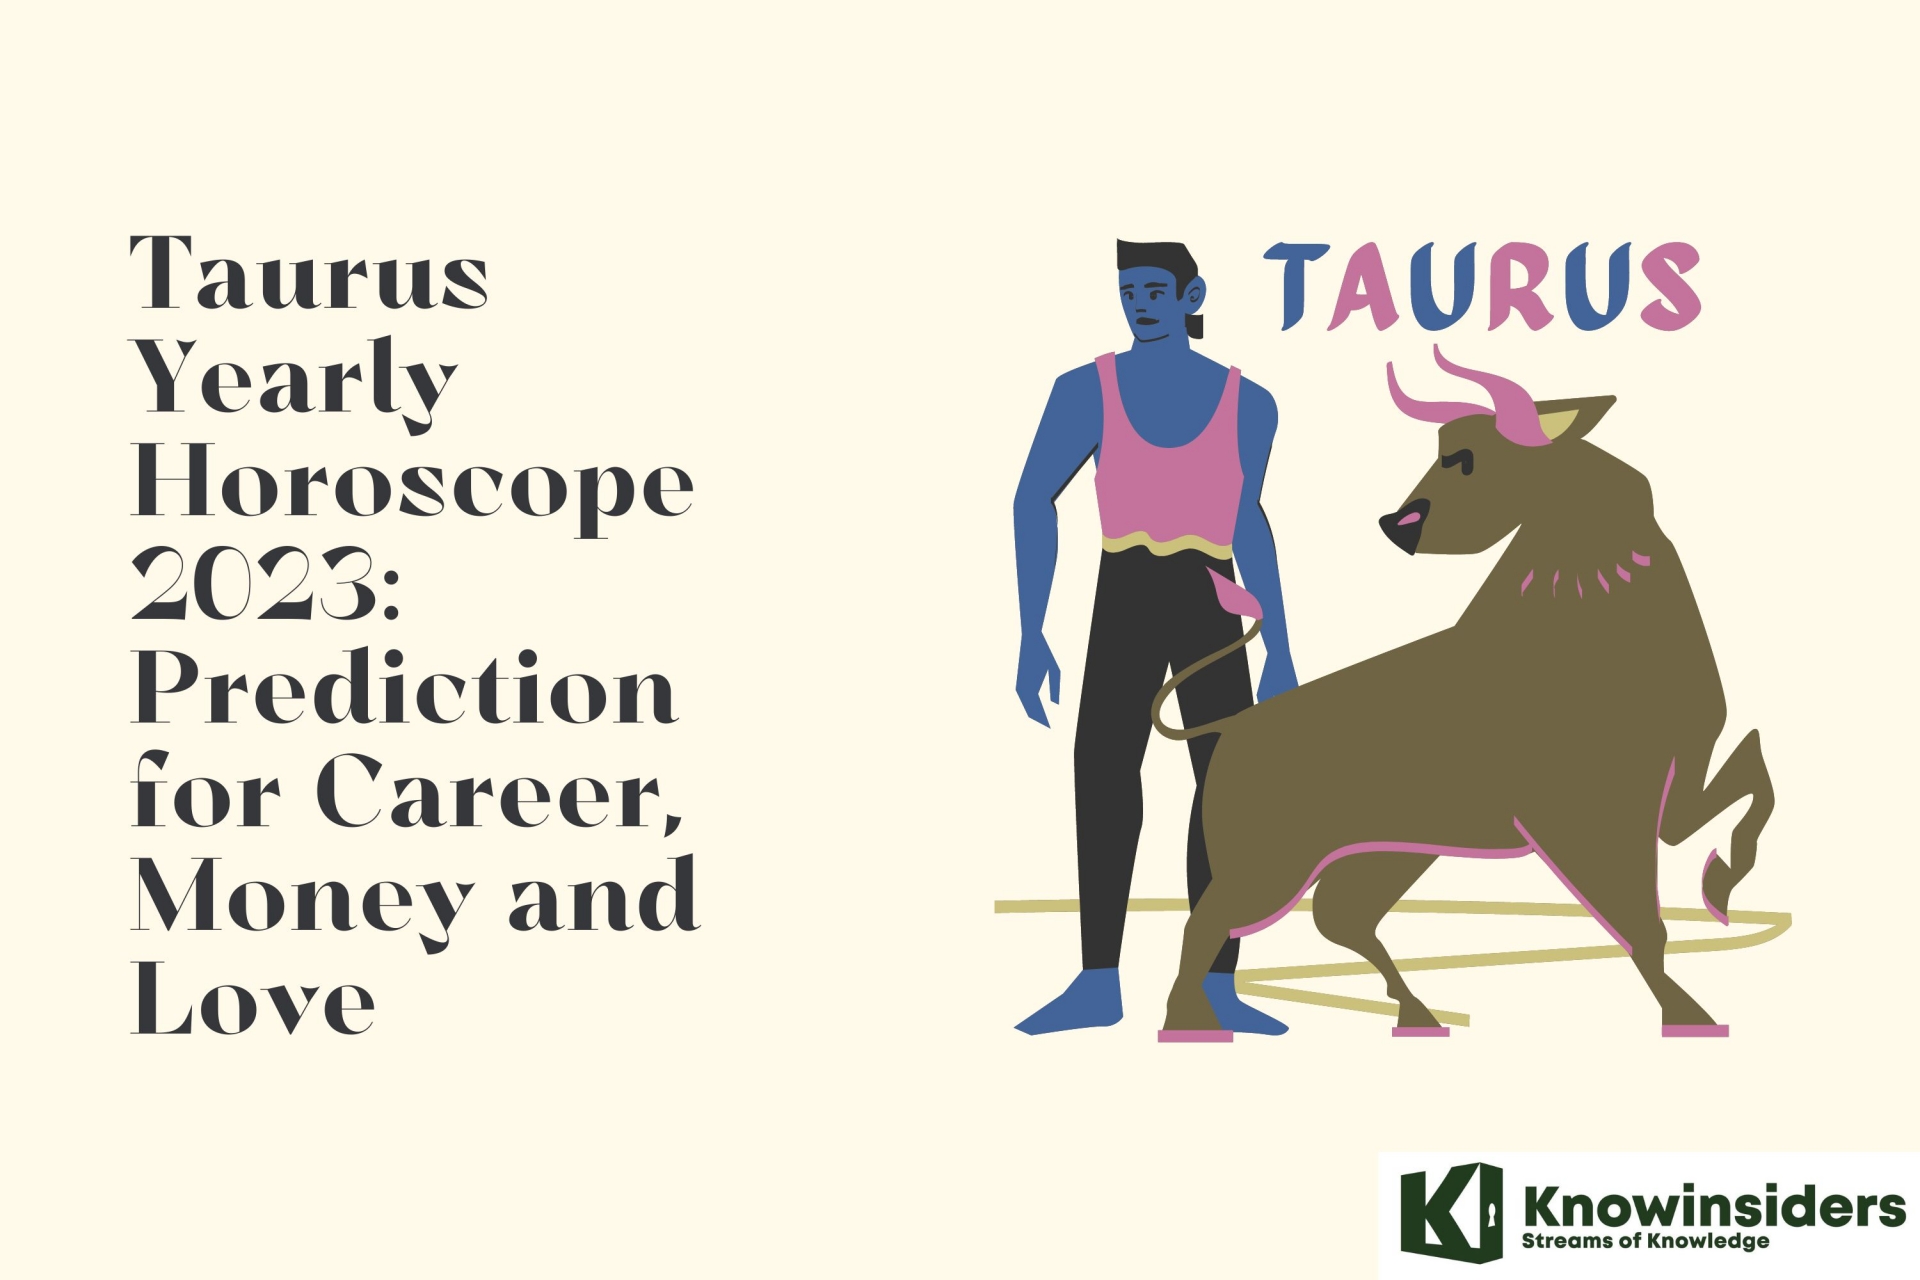 Taurus Yearly Horoscope 2023: Prediction for Career, Money and Love